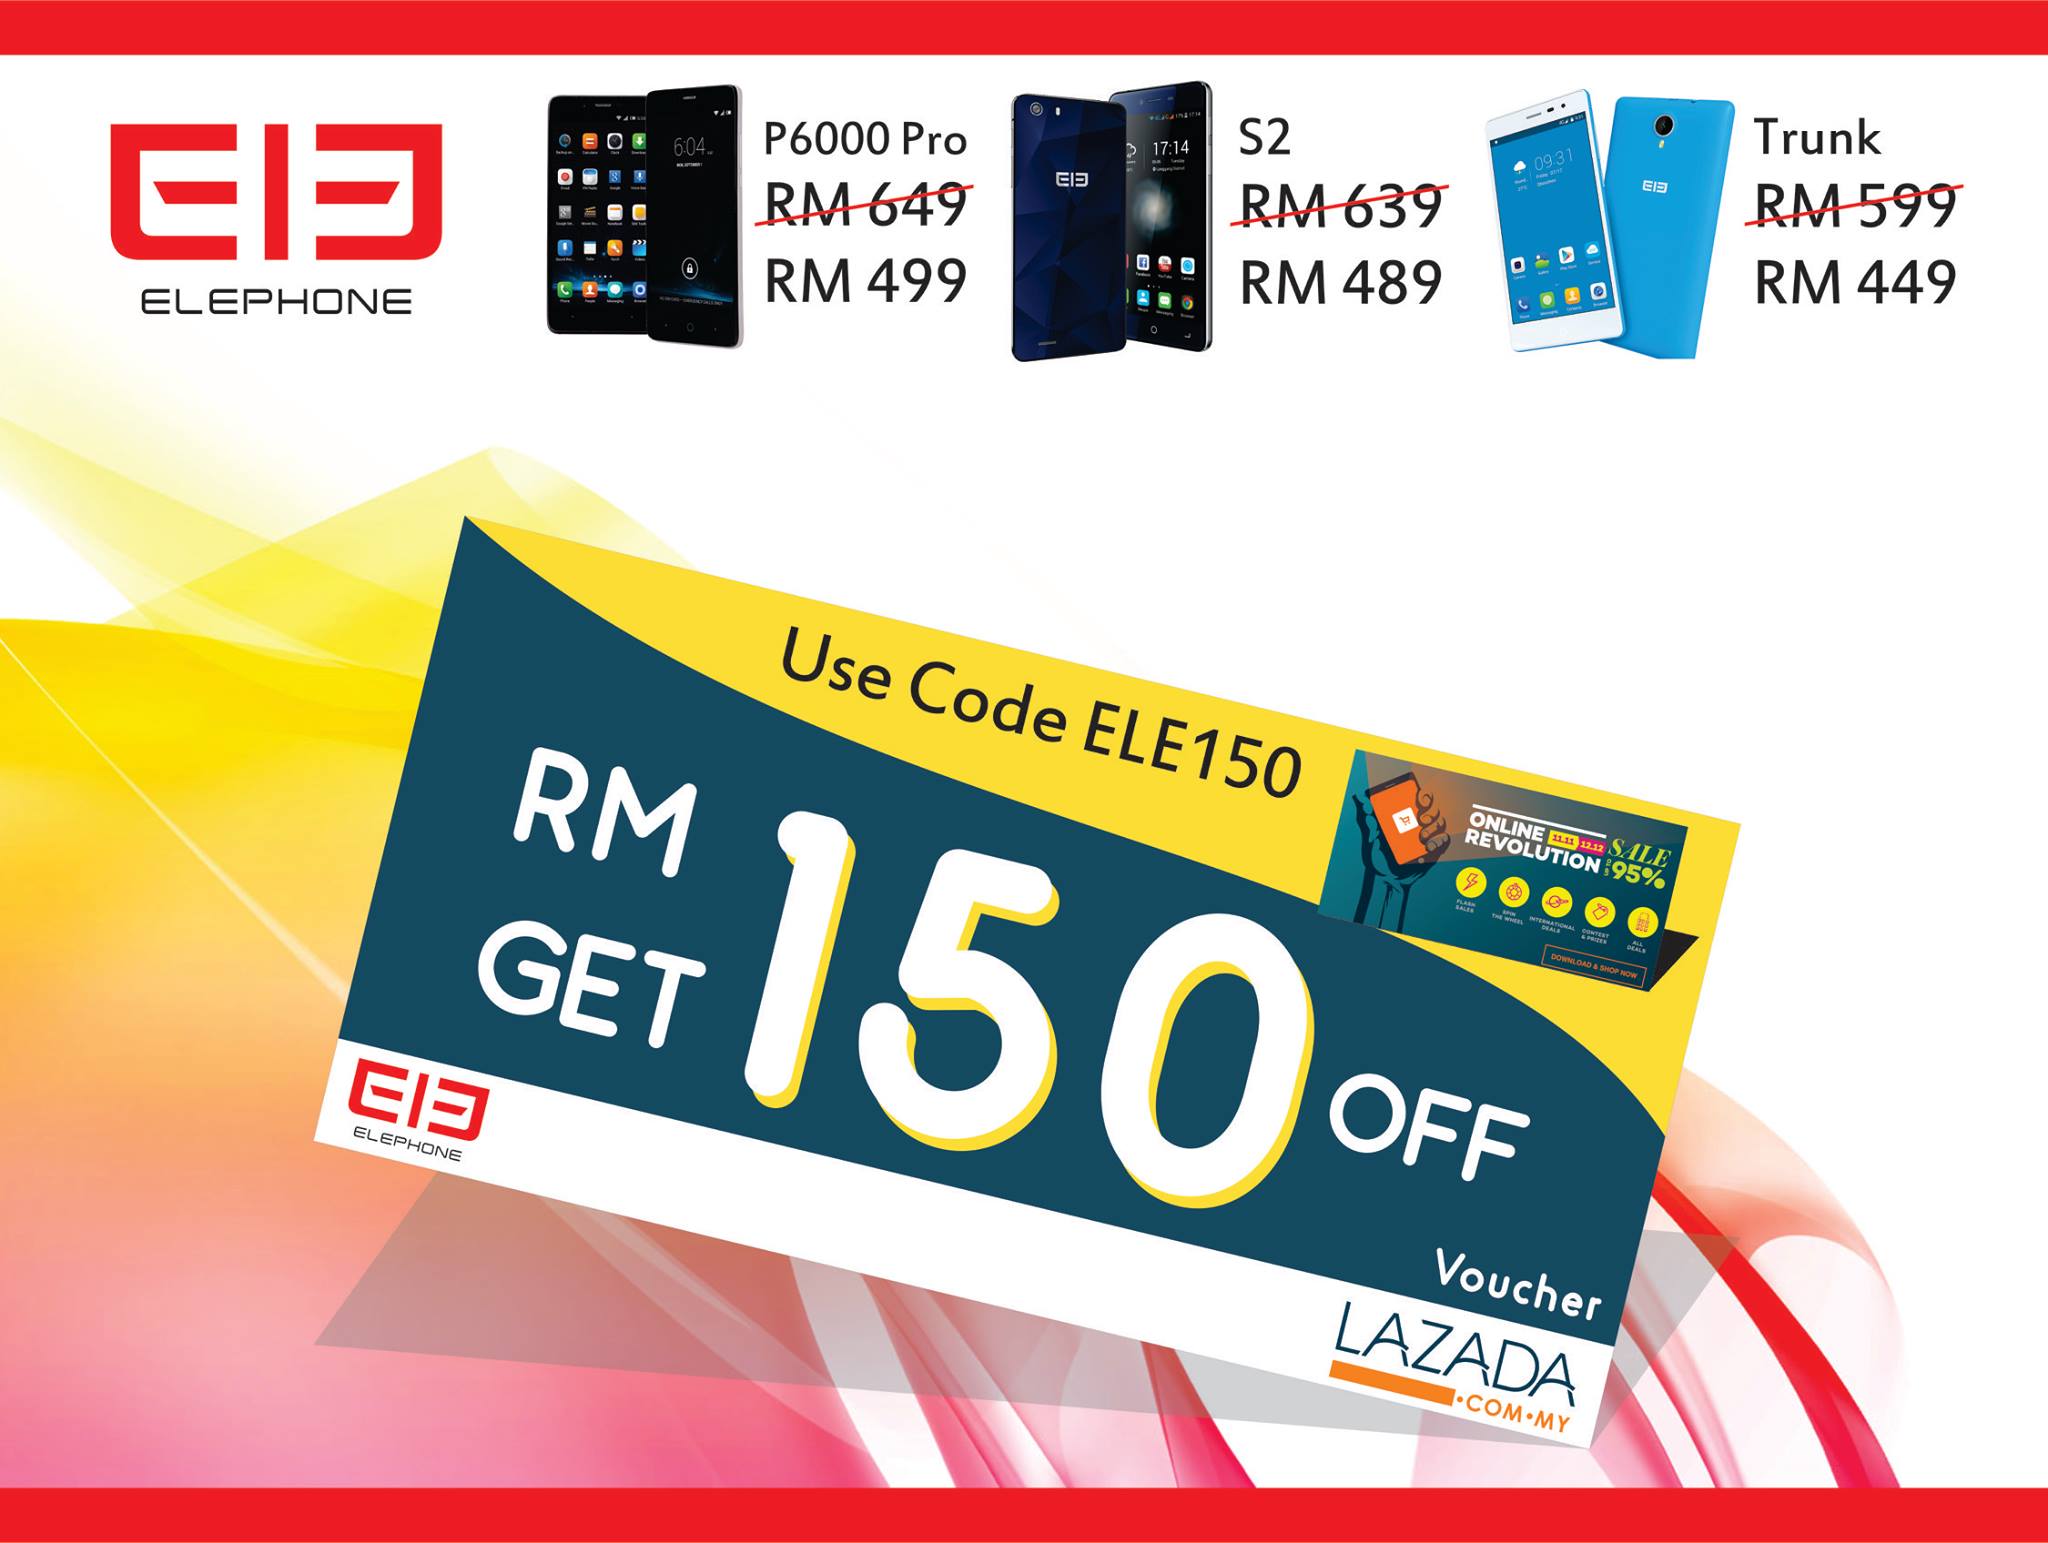 Elephone offers RM 150 off on Lazada 12.12